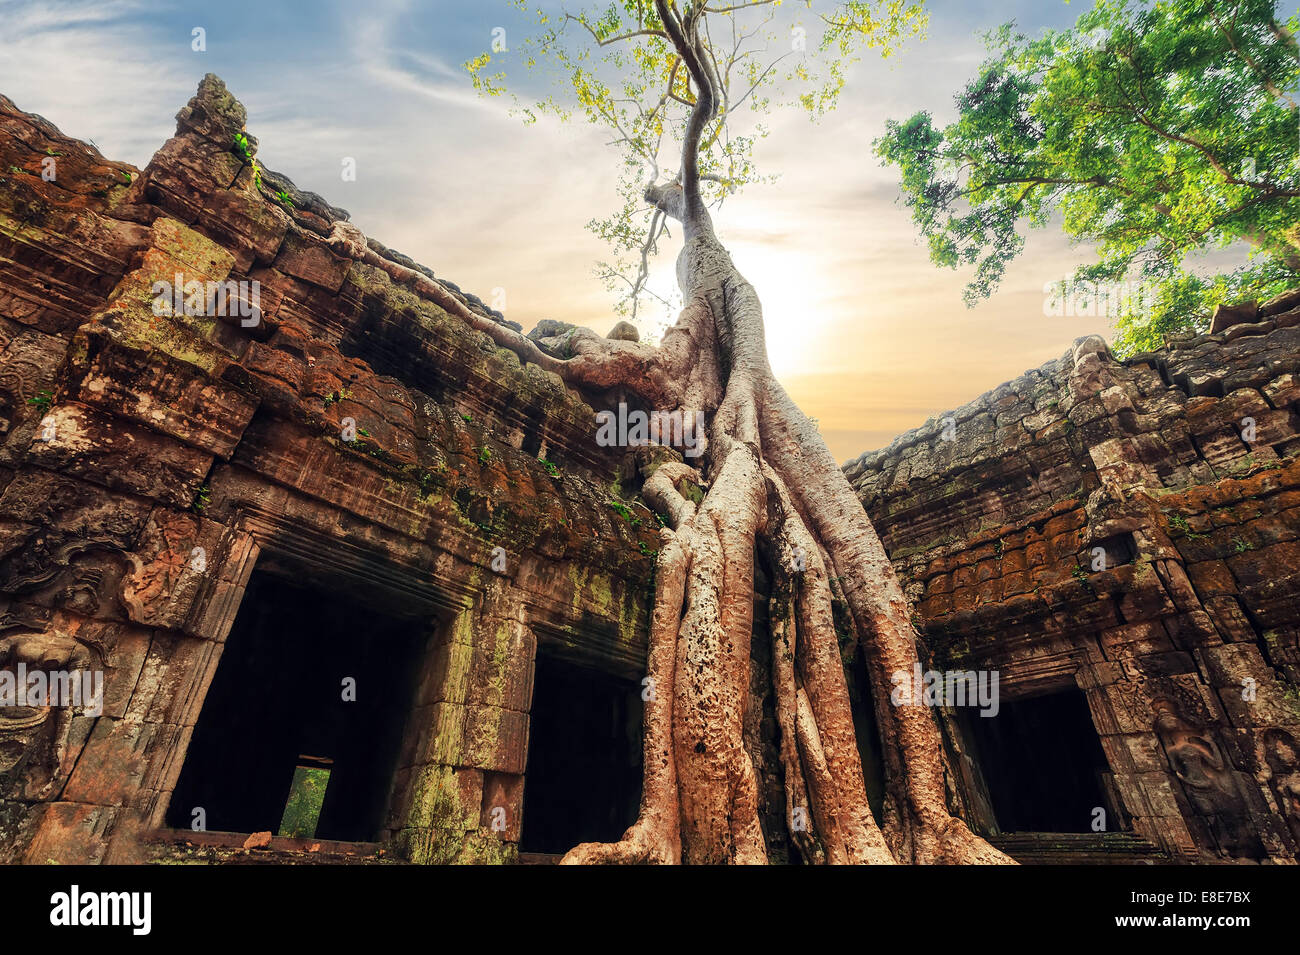 Ancient Khmer architecture. Ta Prohm temple with giant banyan tree at sunset. Angkor Wat complex, Siem Reap, Cambodia travel des Stock Photo